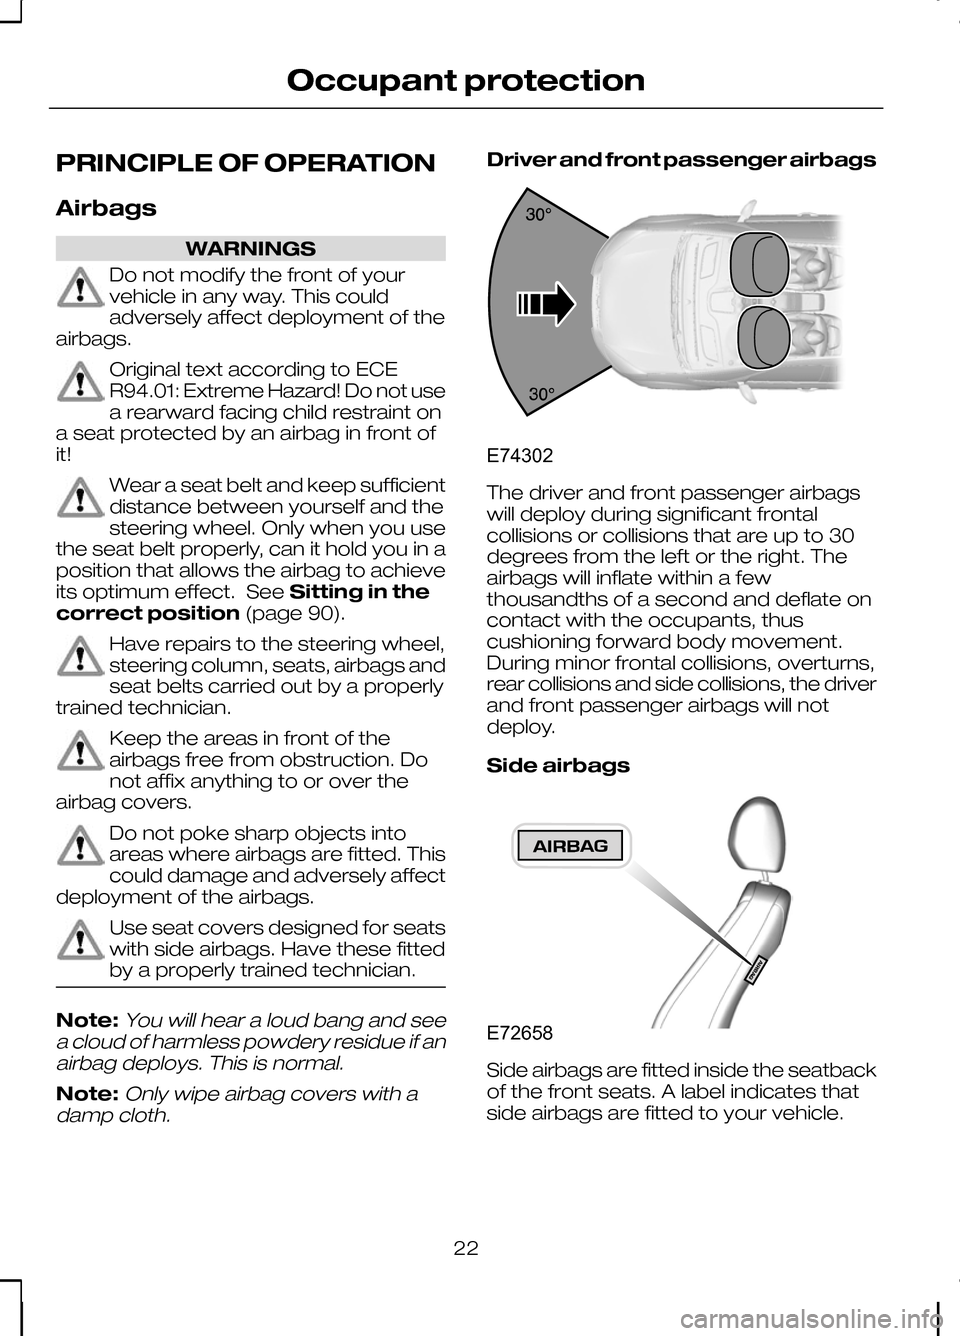 FORD KUGA 2010 1.G Owners Manual PRINCIPLE OF OPERATION
Airbags
WARNINGS
Do not modify the front of your
vehicle in any way. This could
adversely affect deployment of the
airbags. Original text according to ECE
R94.01: Extreme Hazard